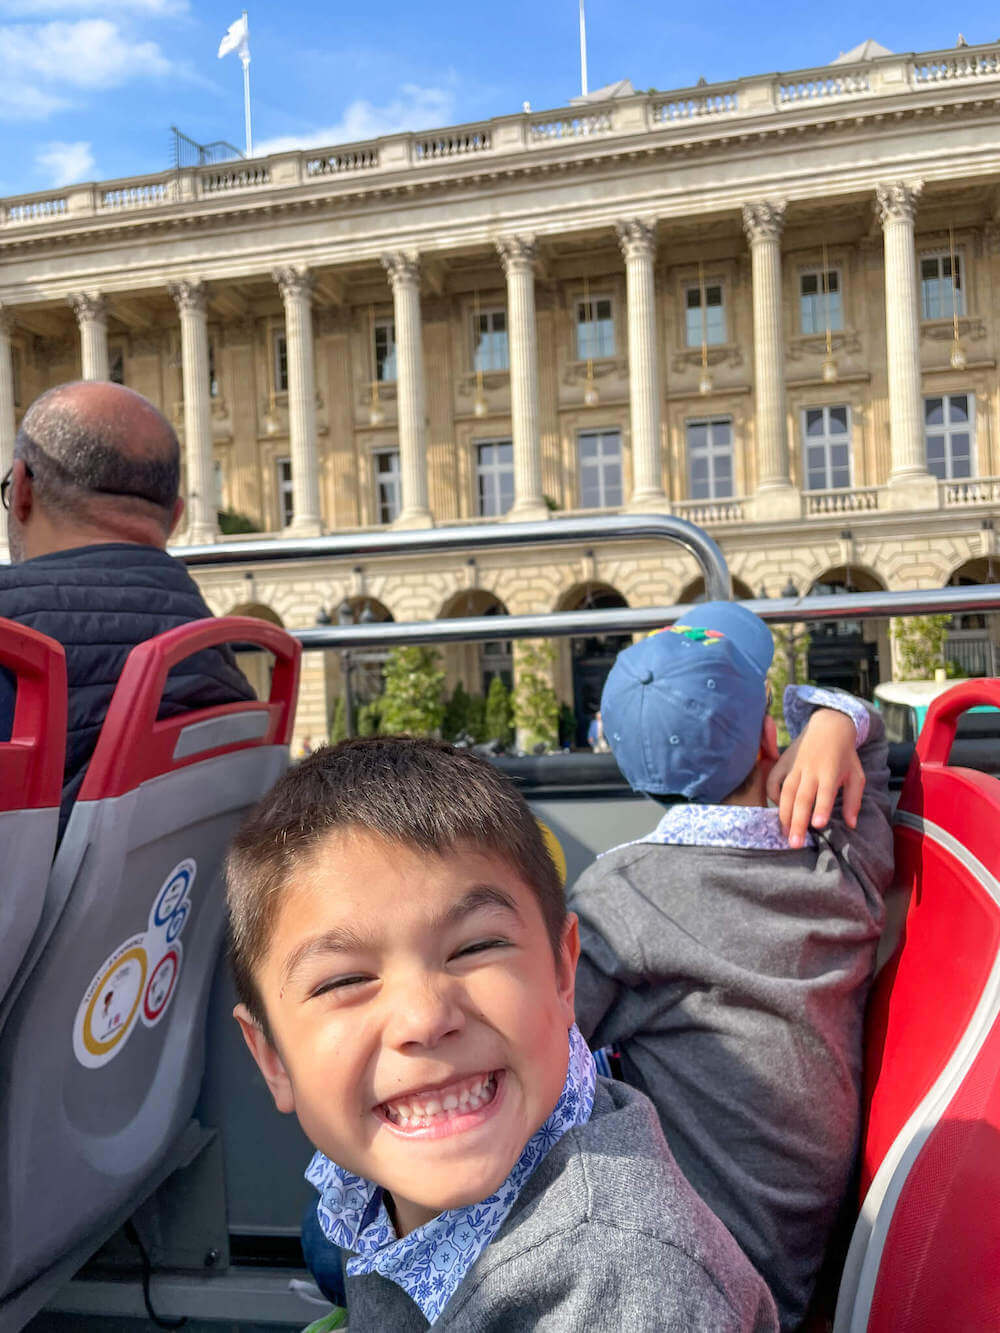 Image of a boy smiling on a double decker bus in Paris